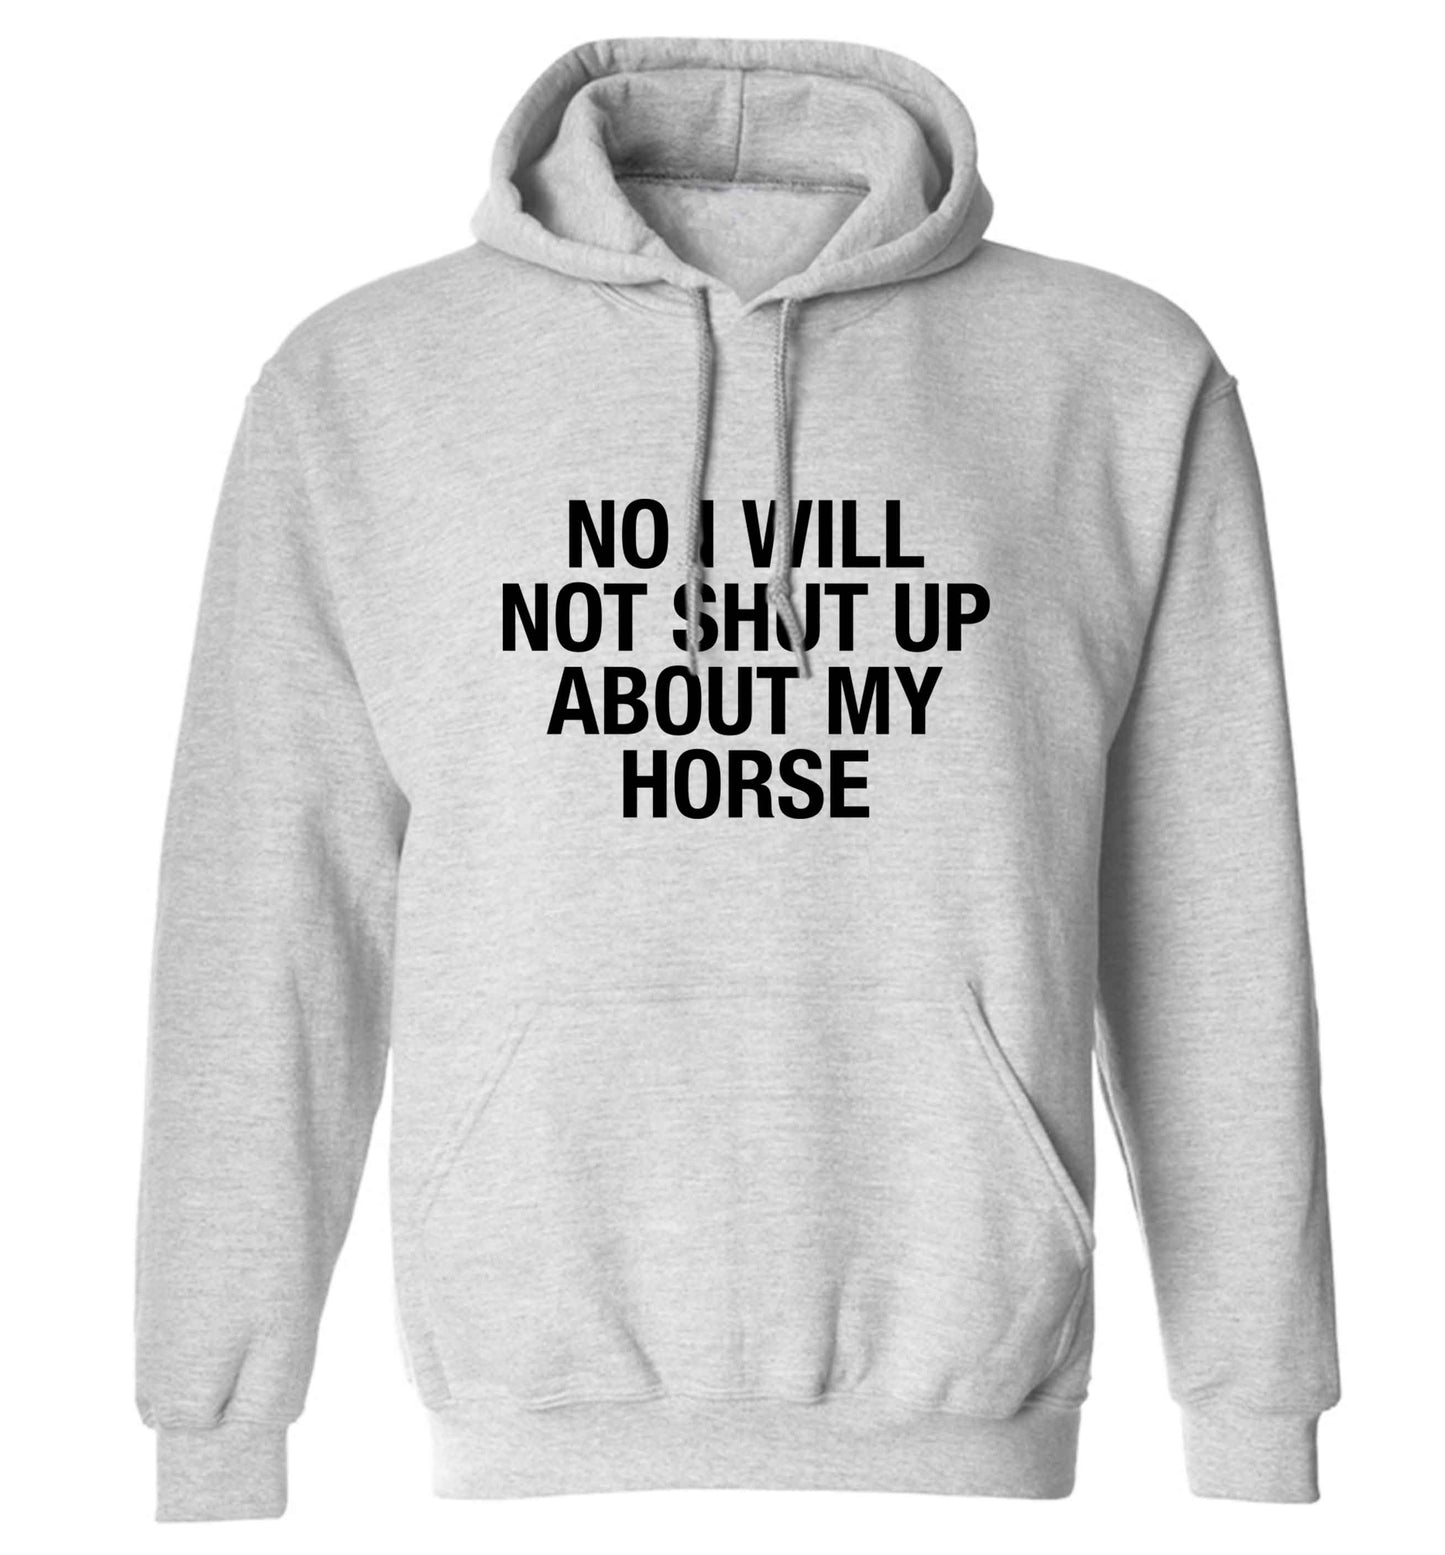 No I will not shut up talking about my horse adults unisex grey hoodie 2XL